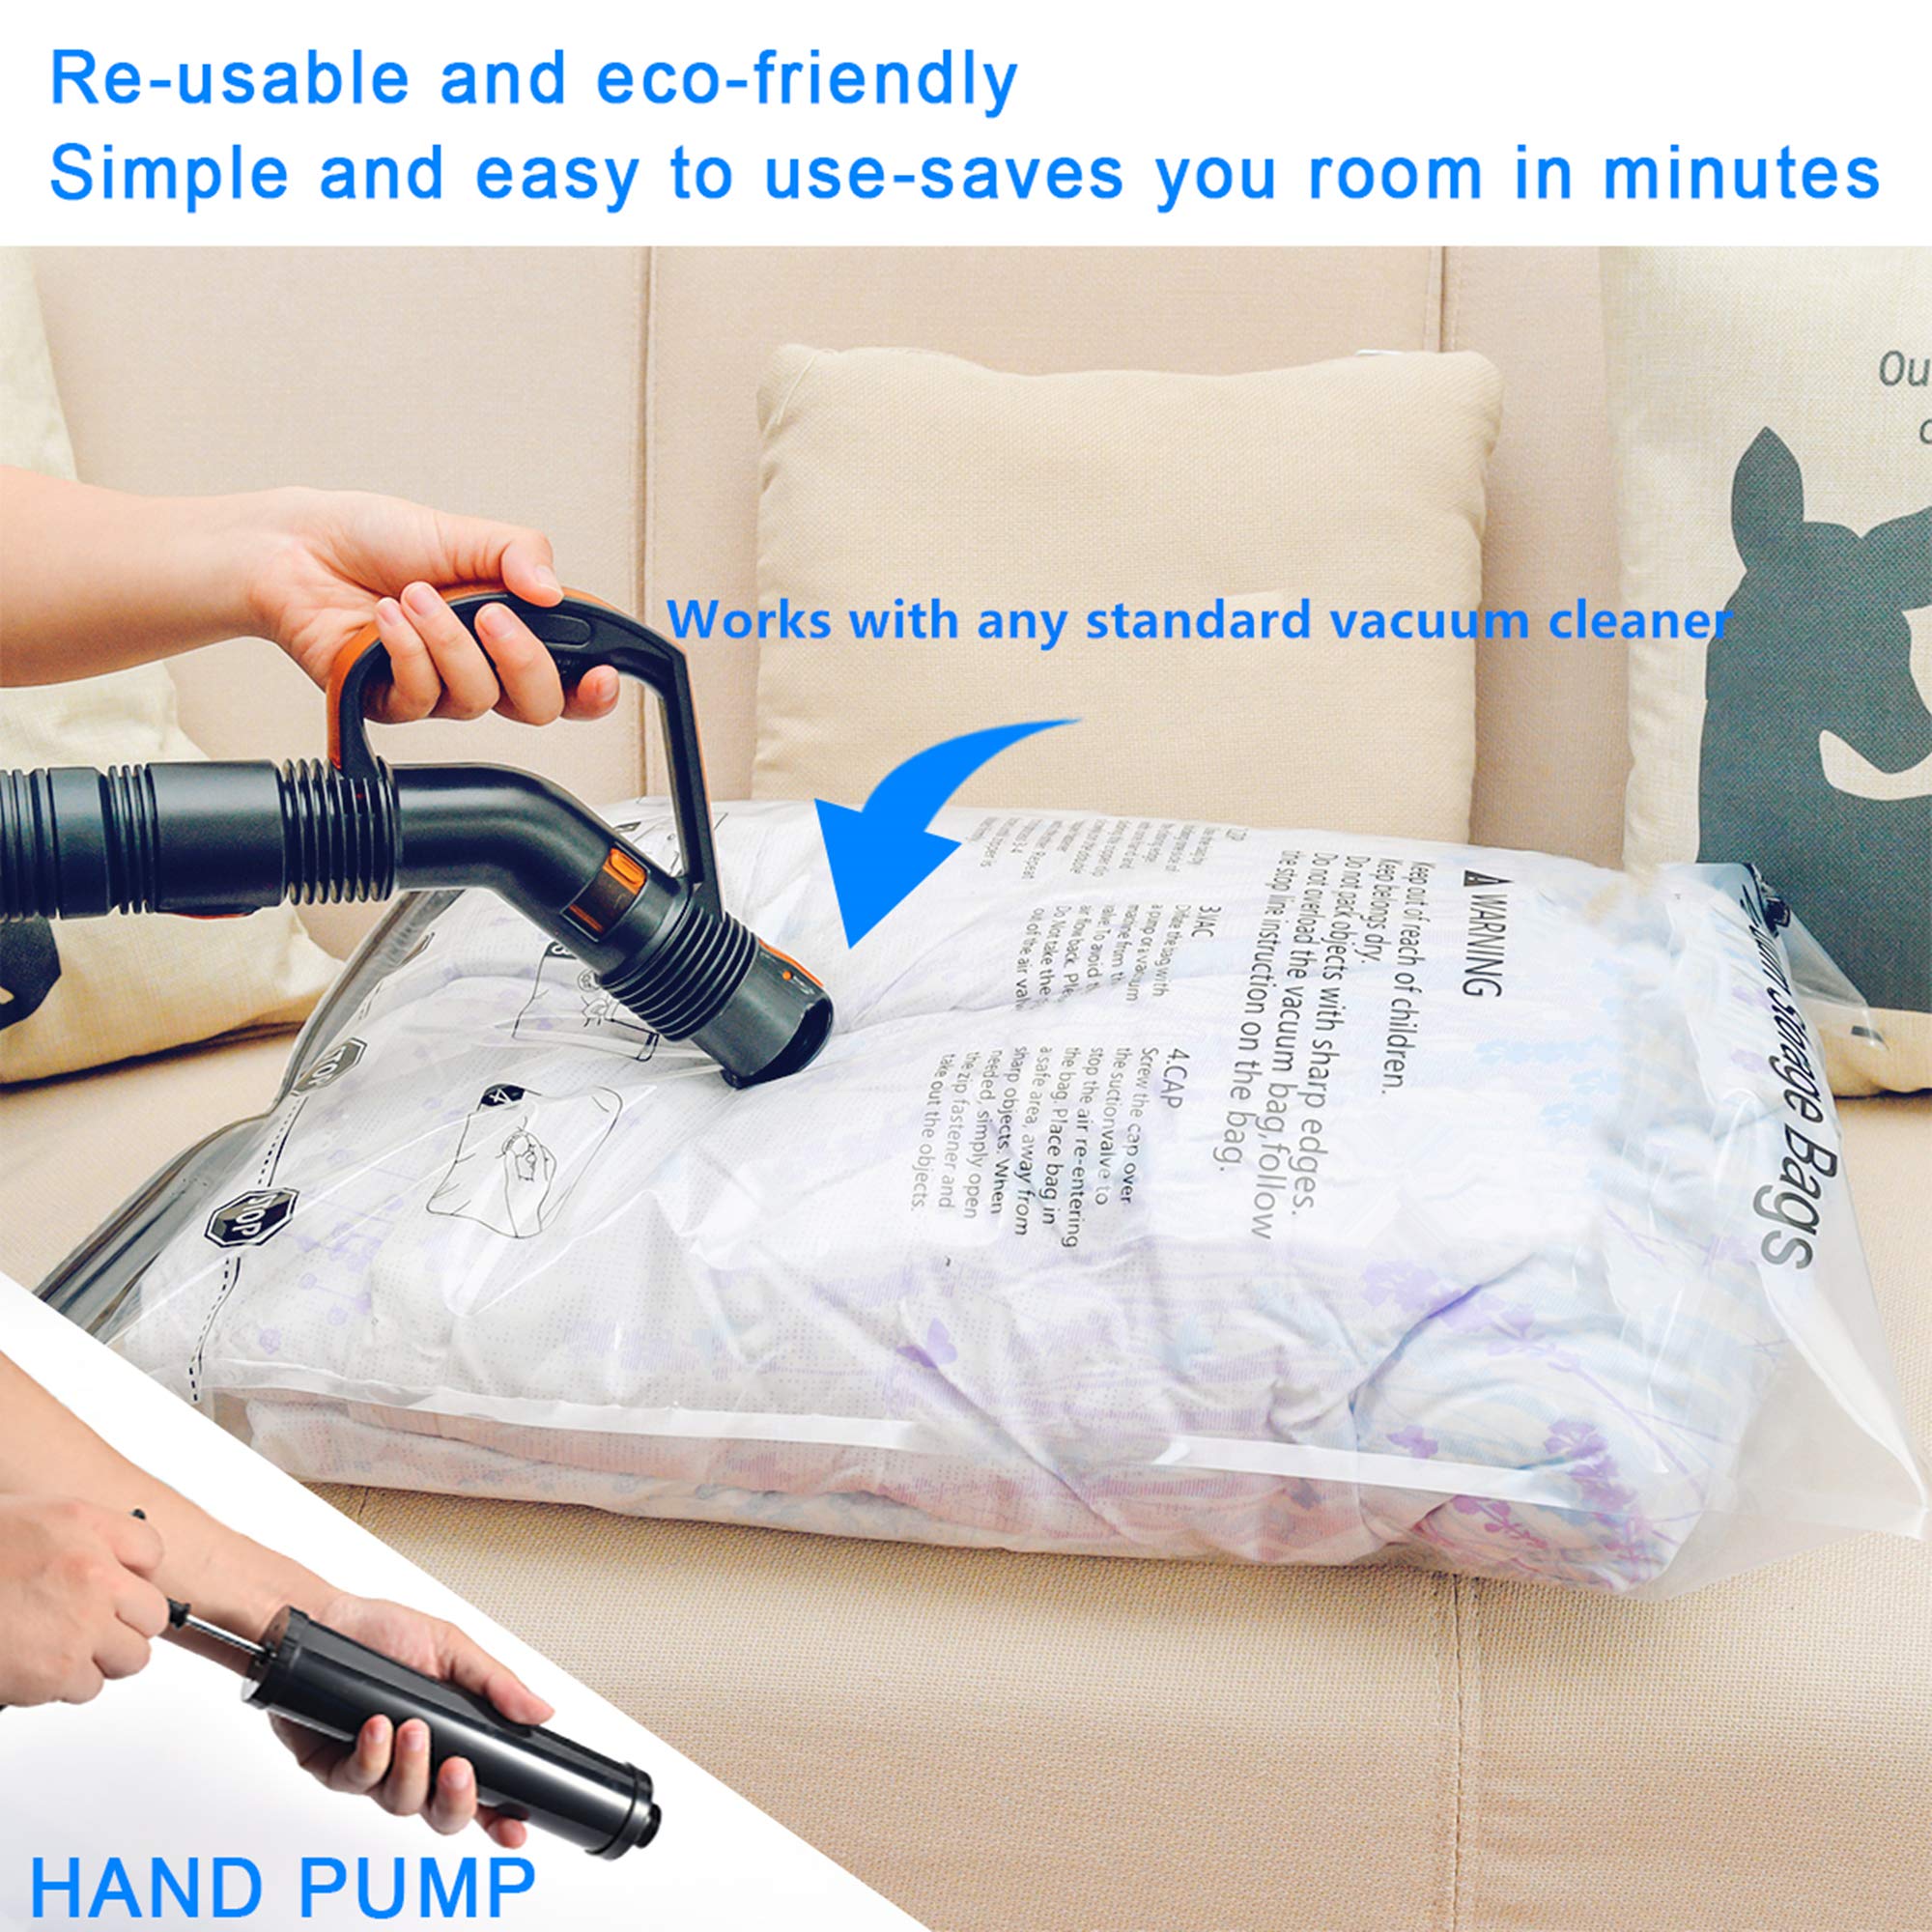 SUOCO Space Saver Bags (3 Jumbo, 3 Large, 3 Medium) Vacuum Storage Sealer Bags for Blankets Clothes Pillows Comforters with Hand Pump